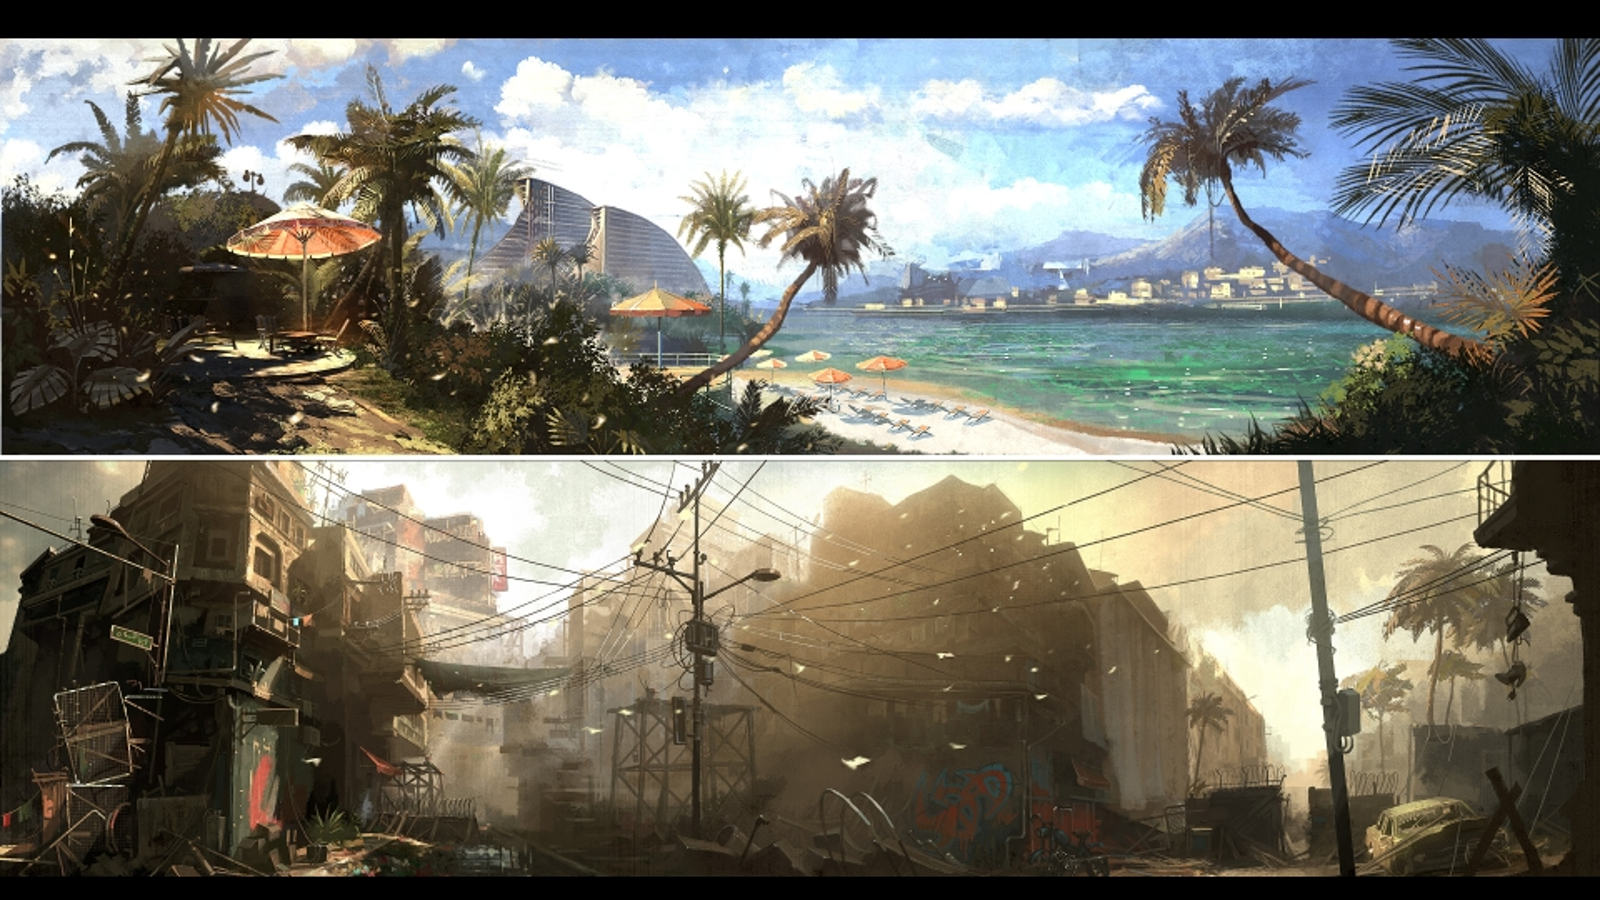 is dead island 2 coming?